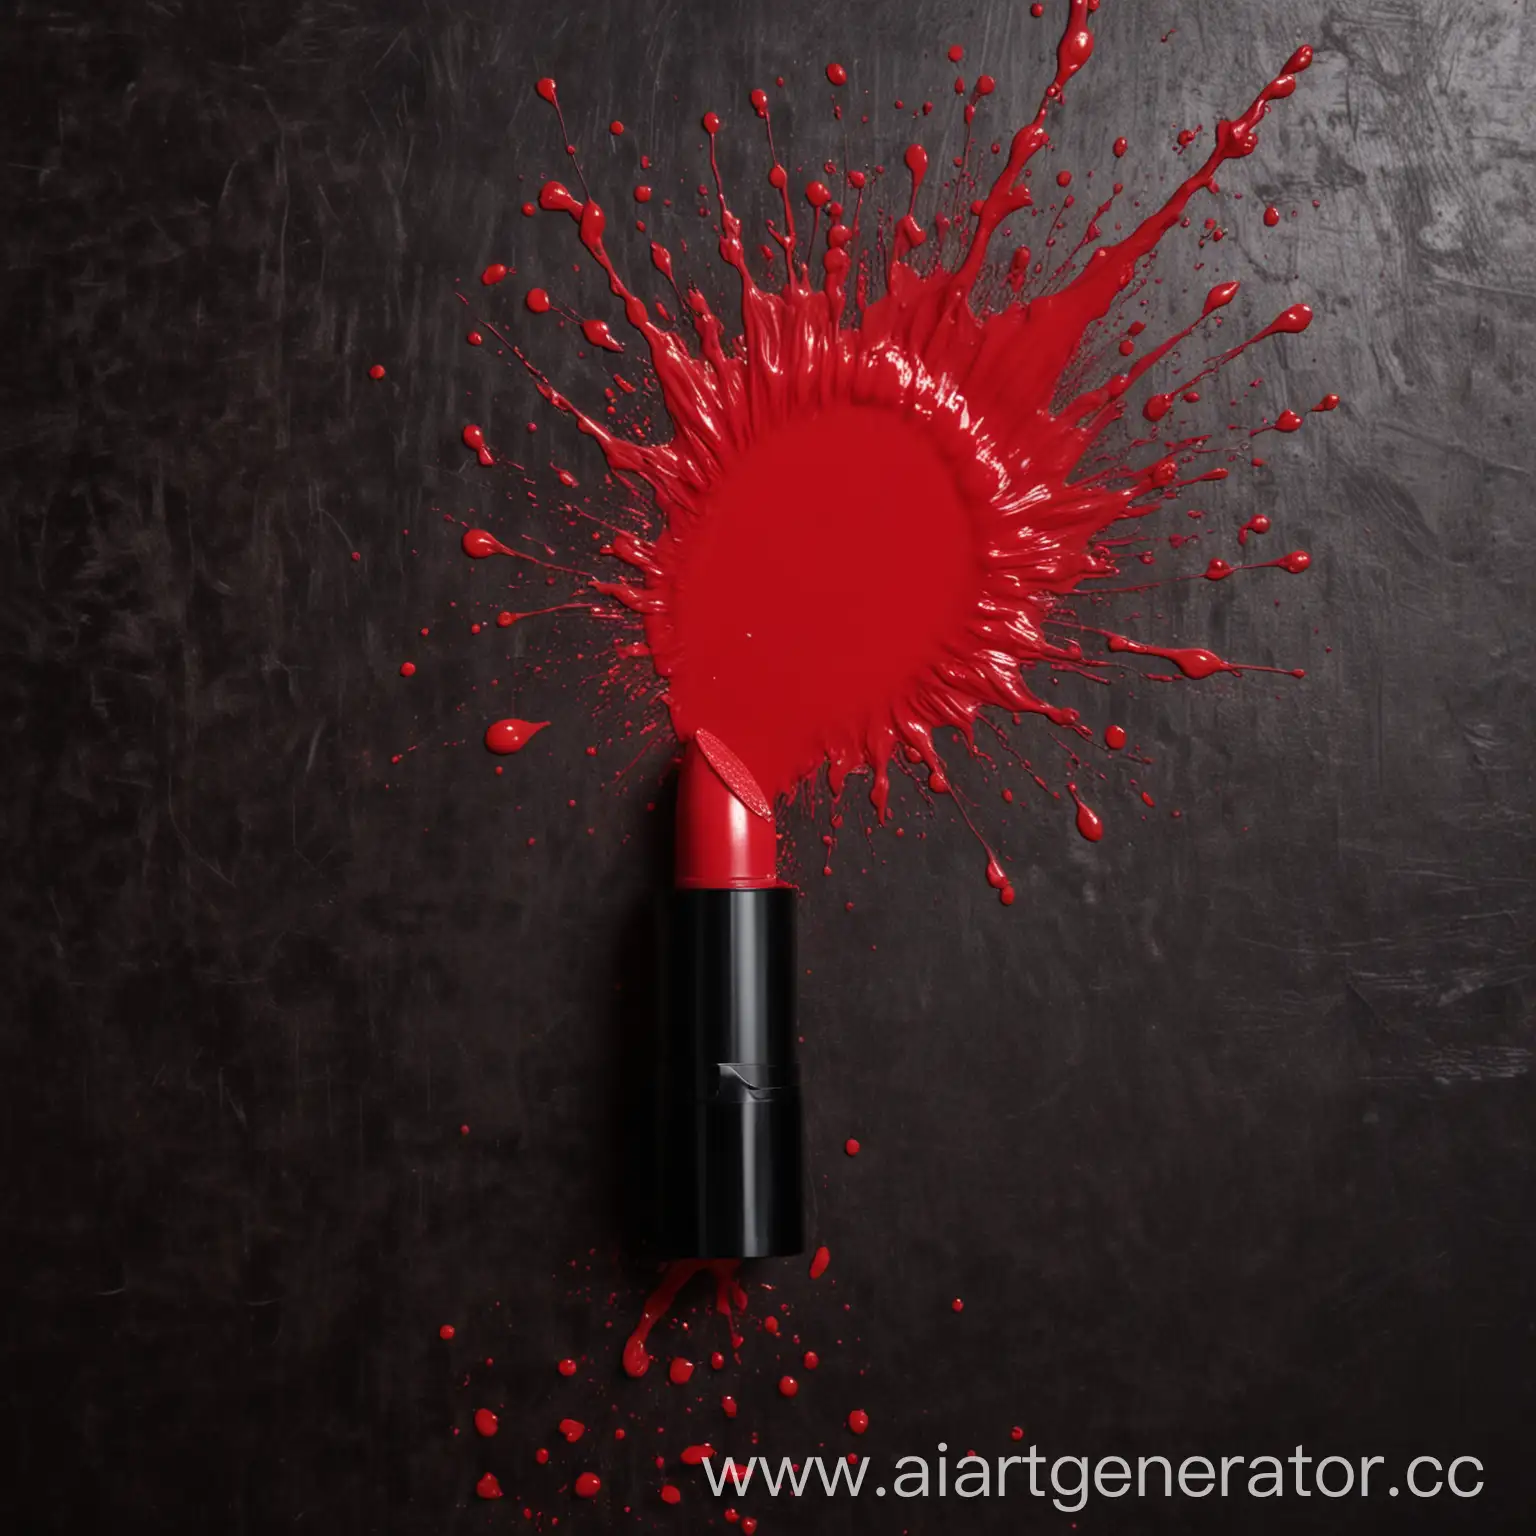 Red-Liquid-Paint-Spilled-with-Diving-Lipstick-Abstract-Art-Concept